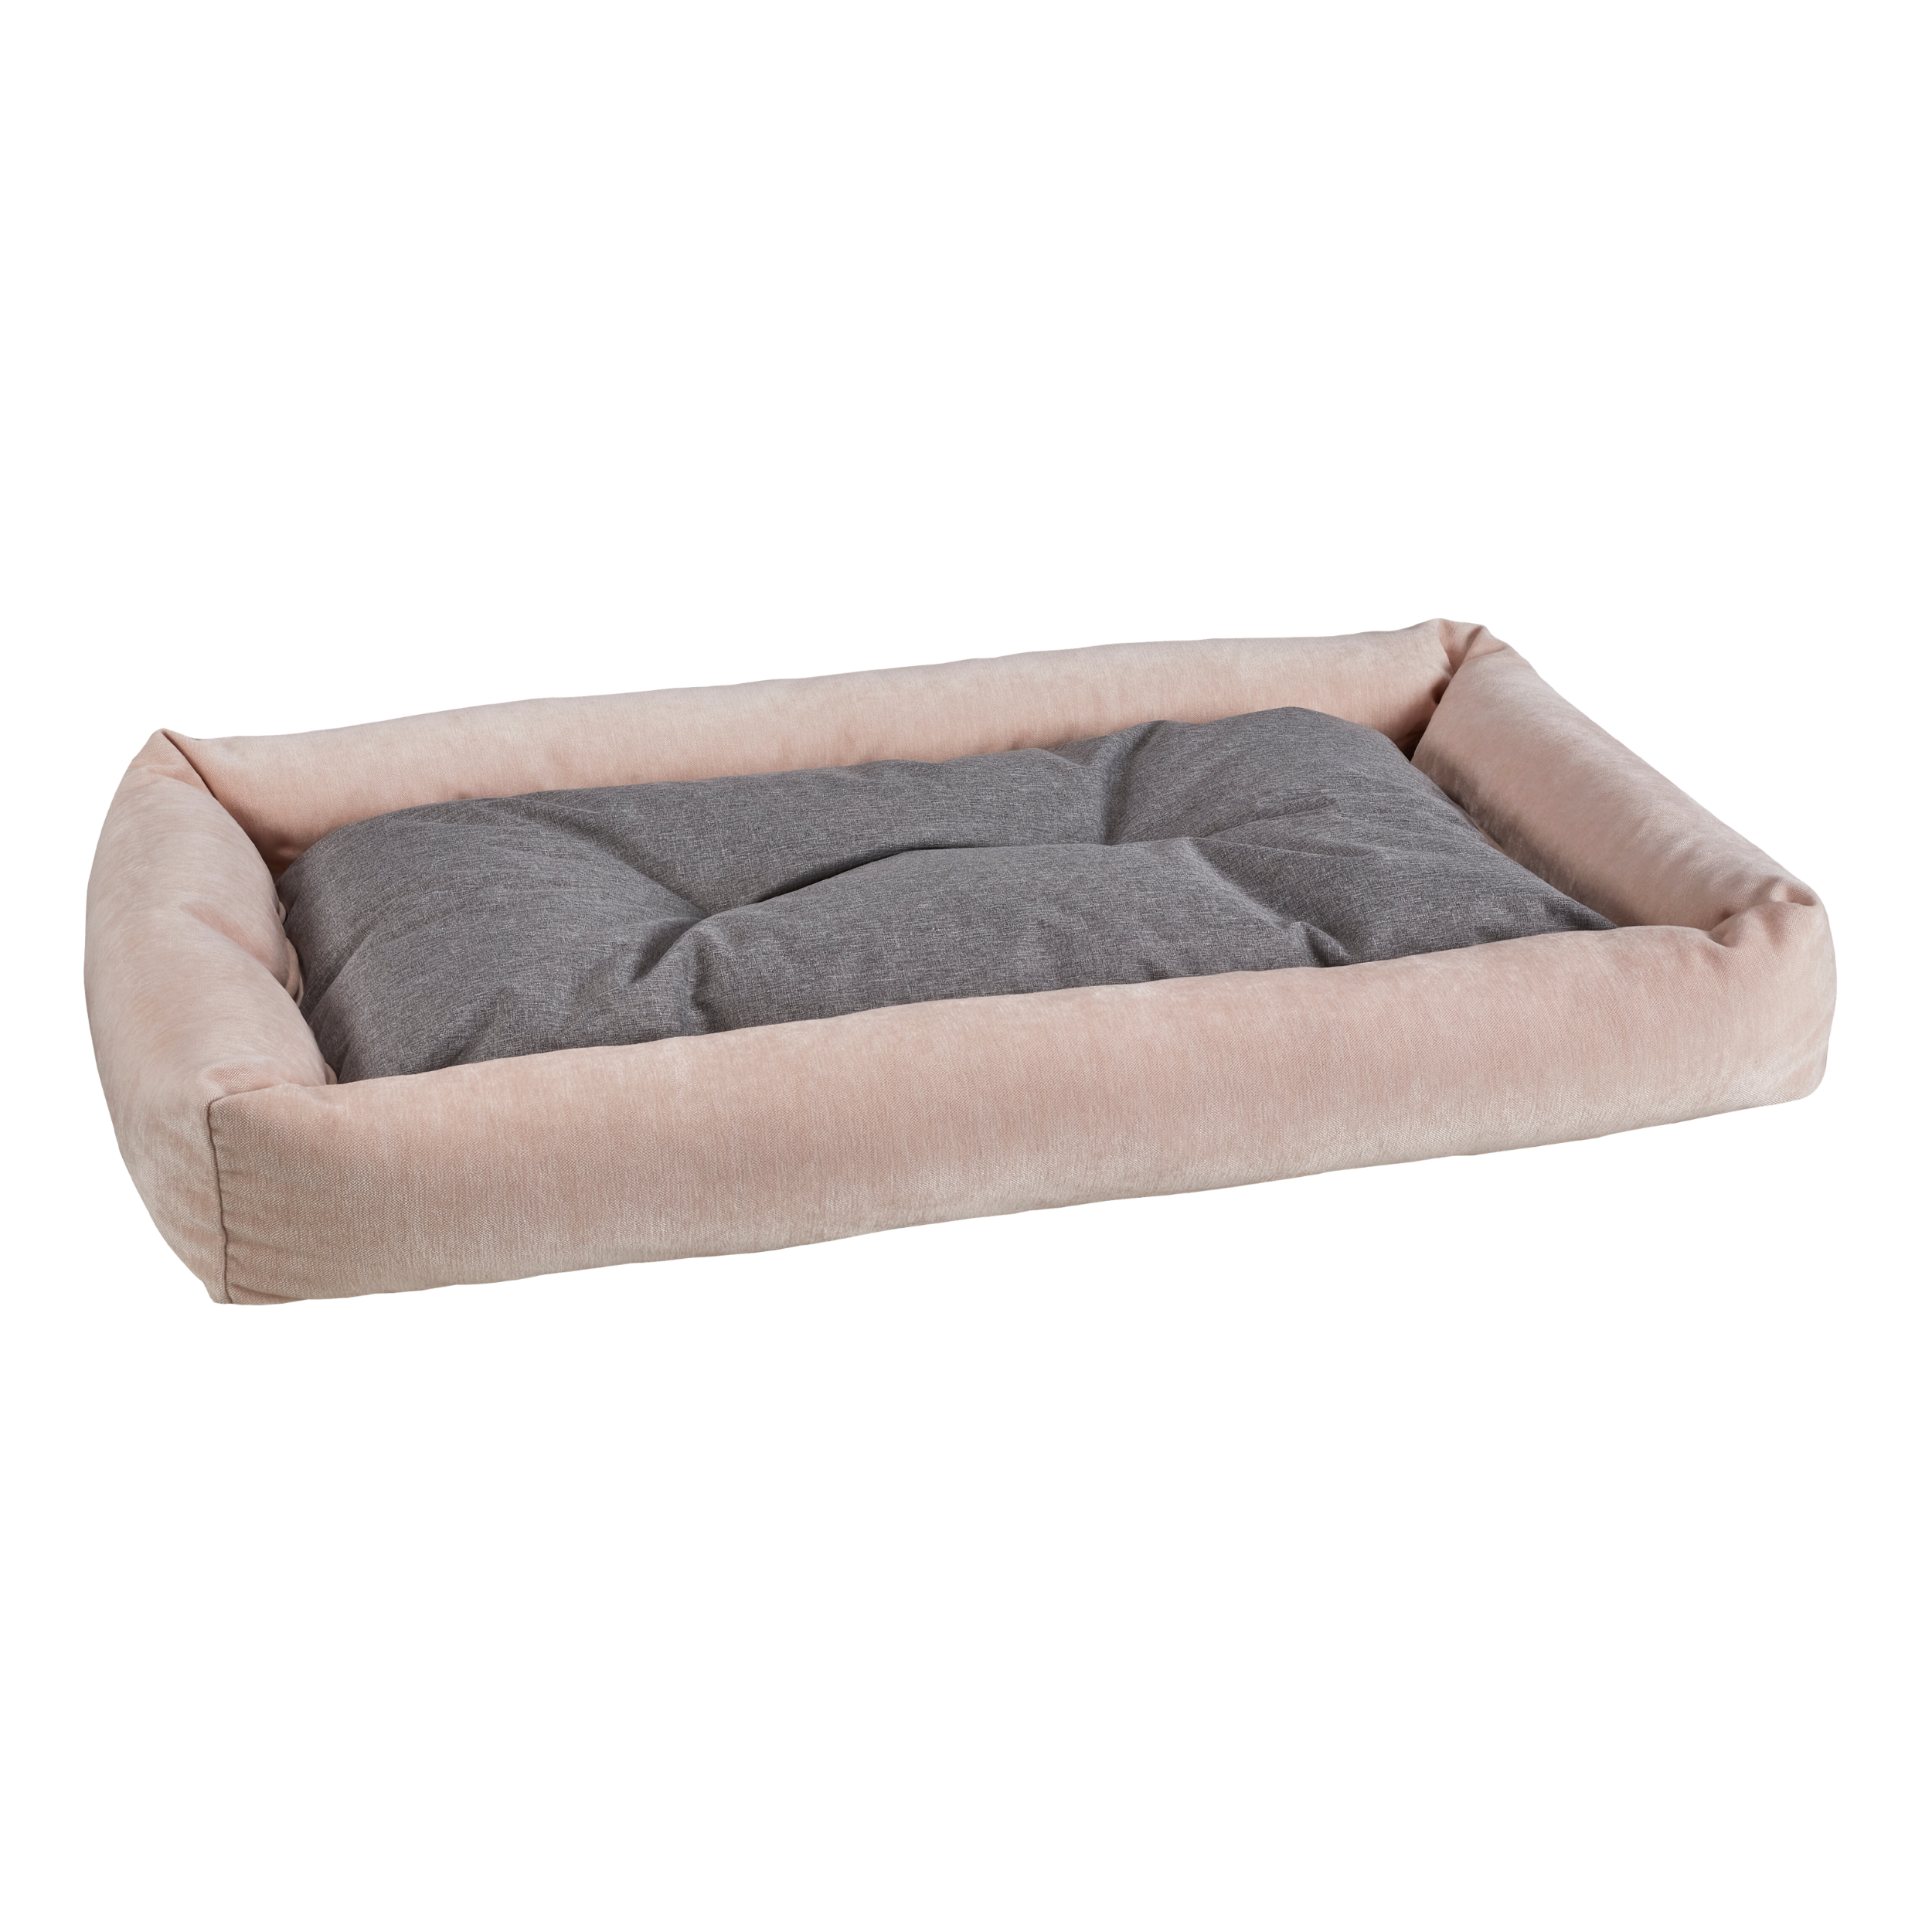 BLUSH-TANGO-DOG-BED-KENNEL-CRATE-MAT